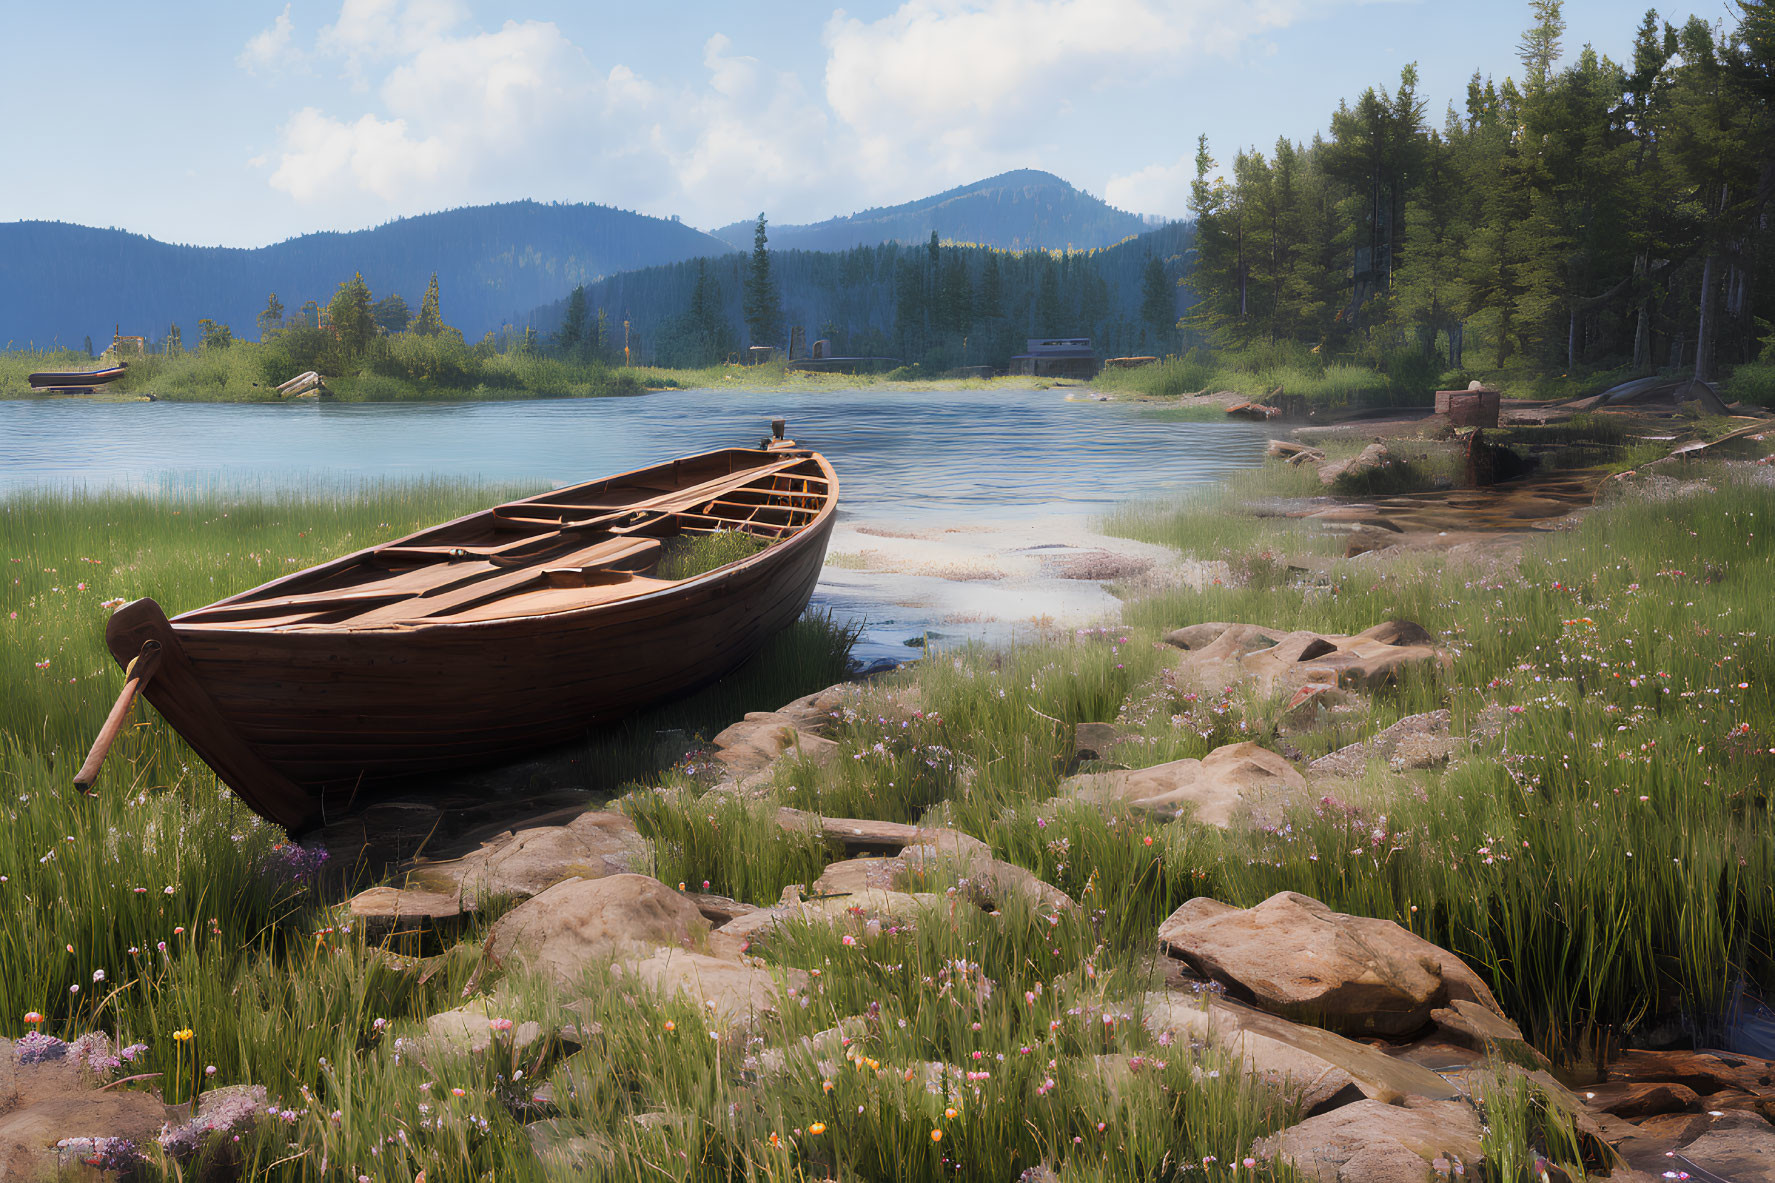 Tranquil lake scene with boat, wildflowers, and mountains